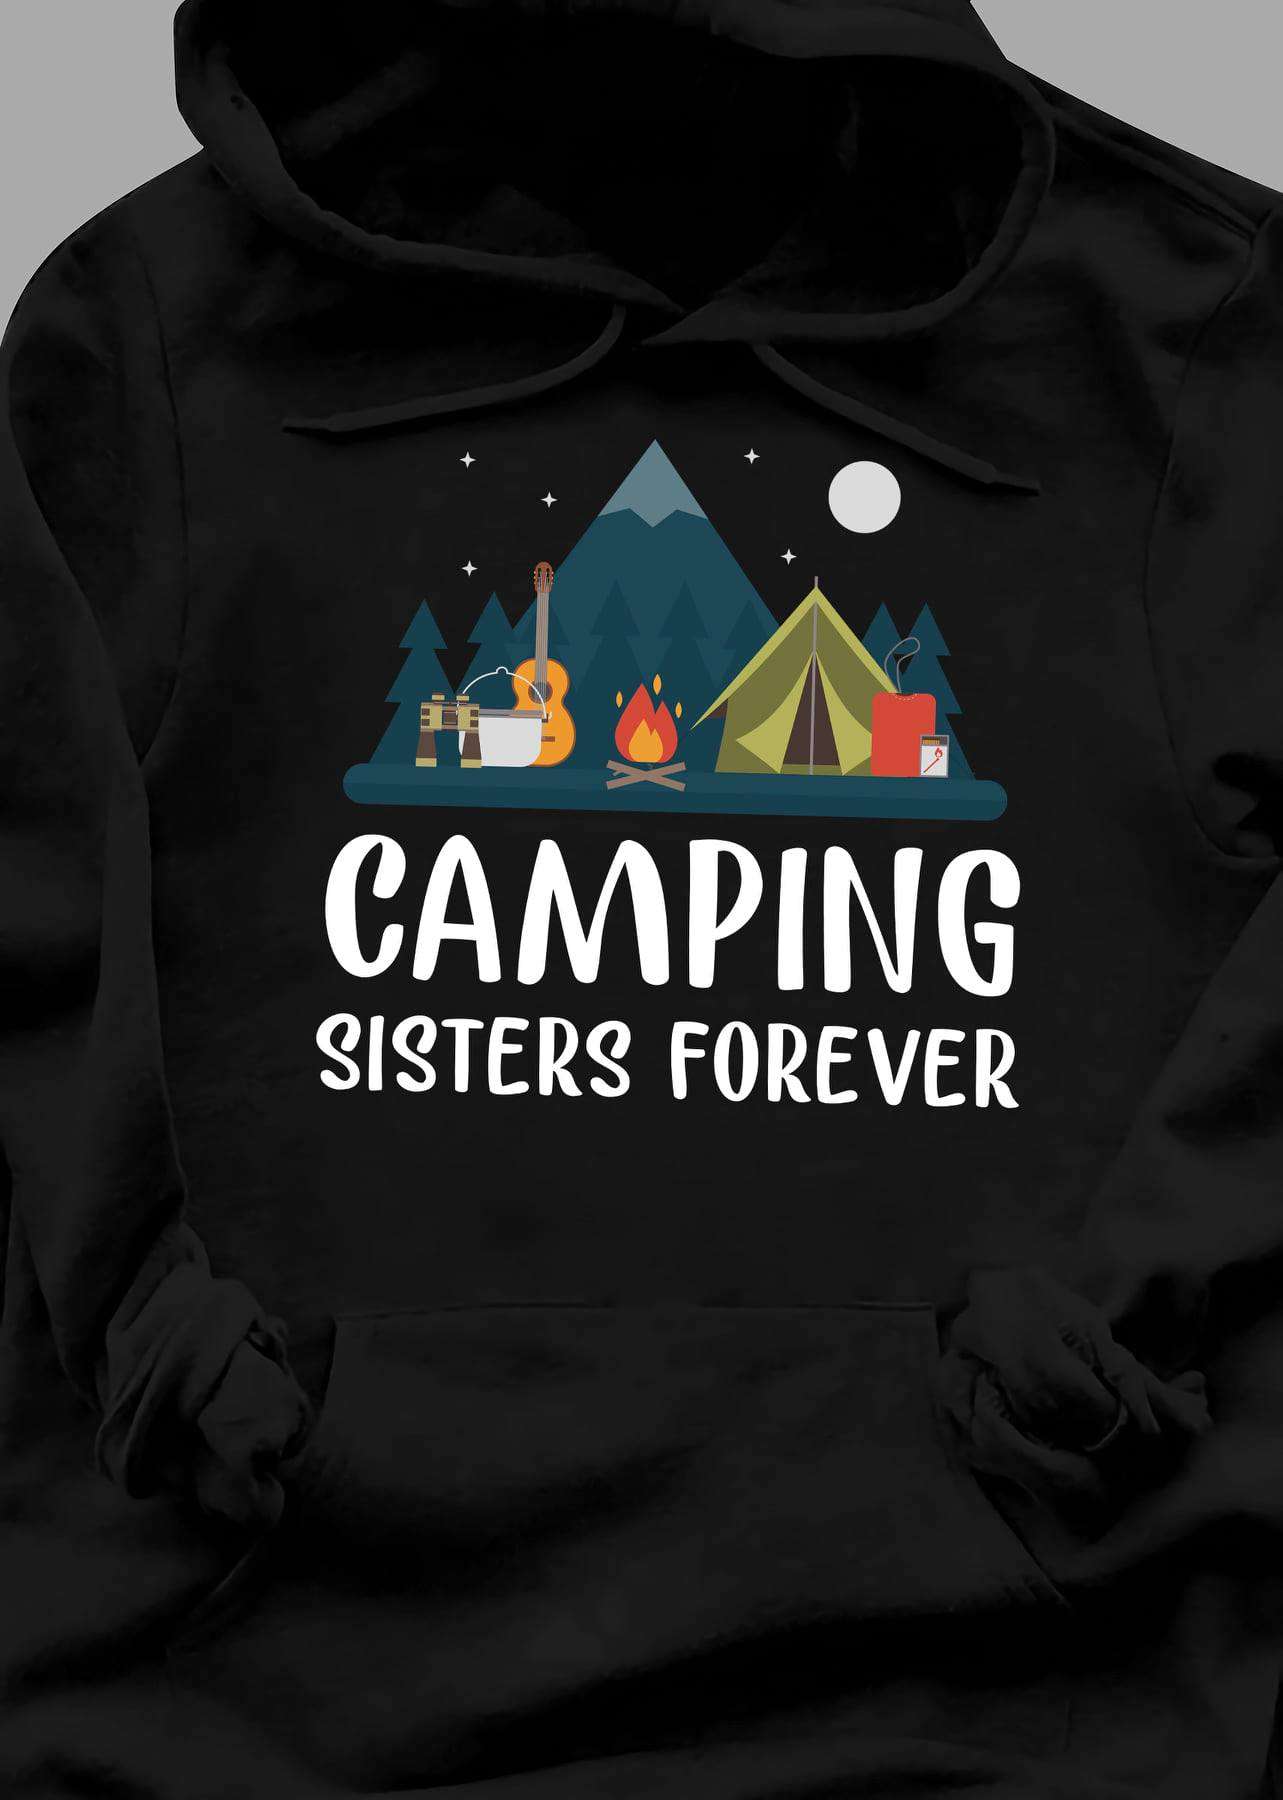 Camping sisters forever - Sister the camping partners, camping and guitar